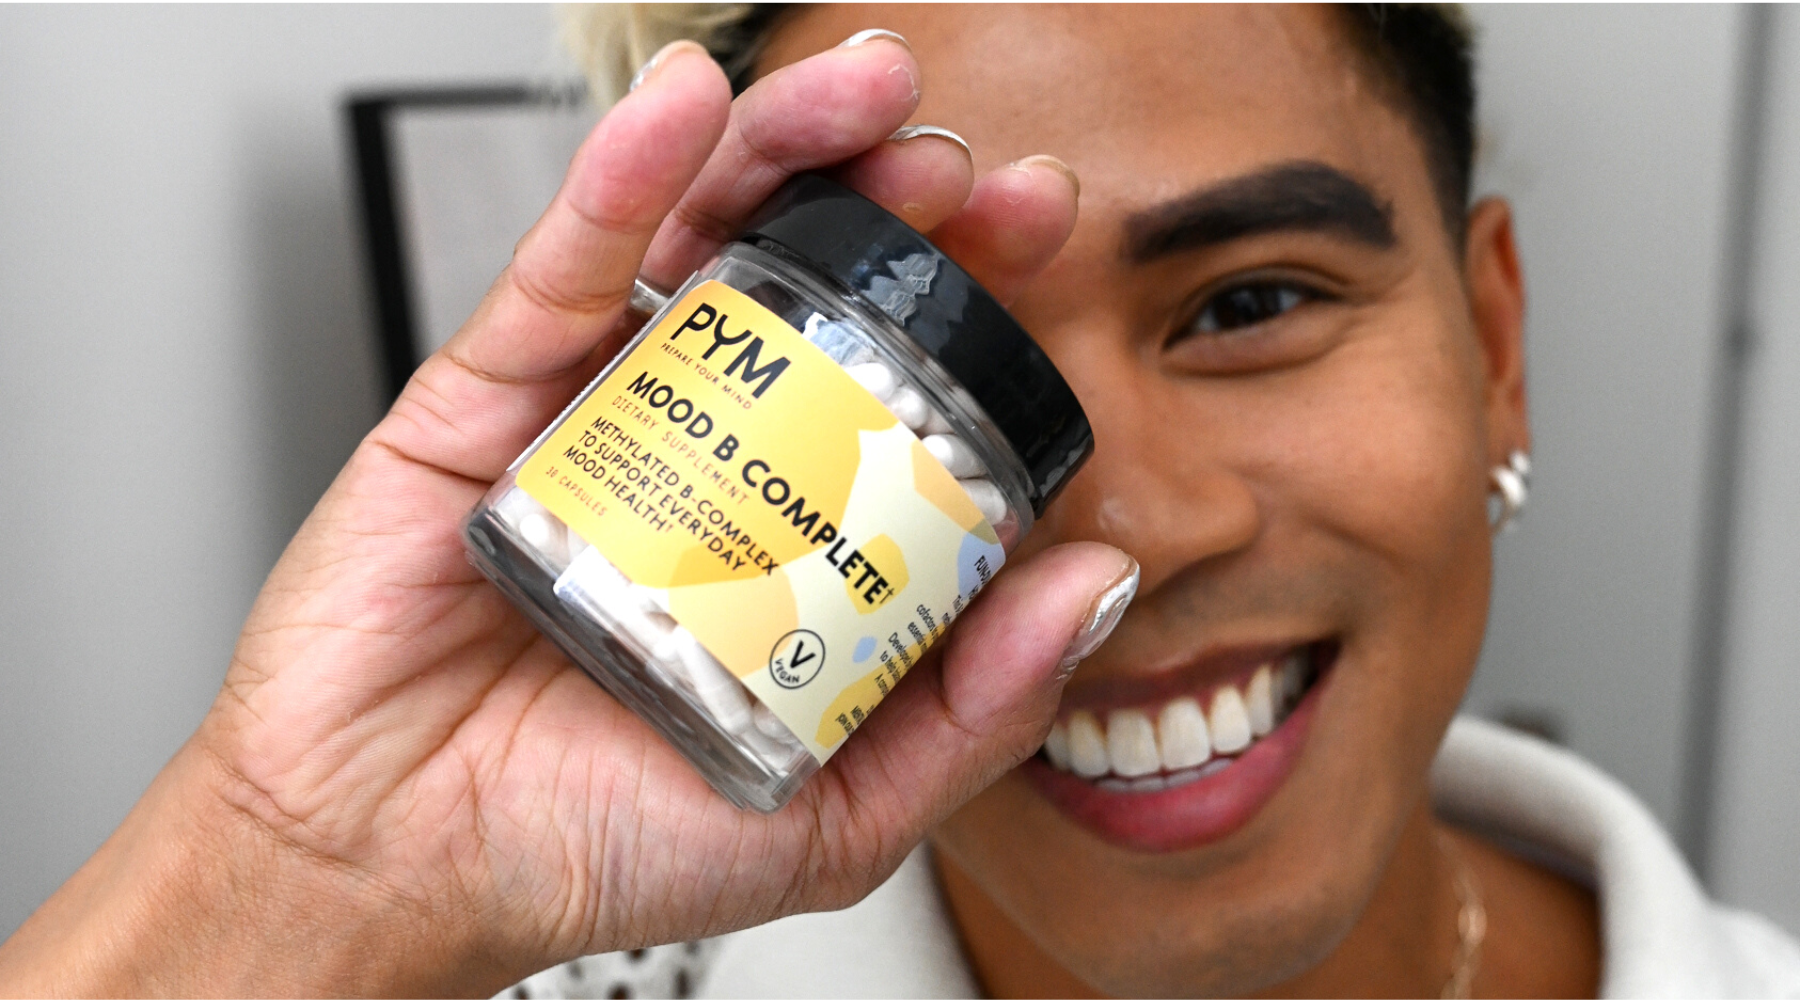 An asian man smiling and holding a jar of mood B complete vitamins